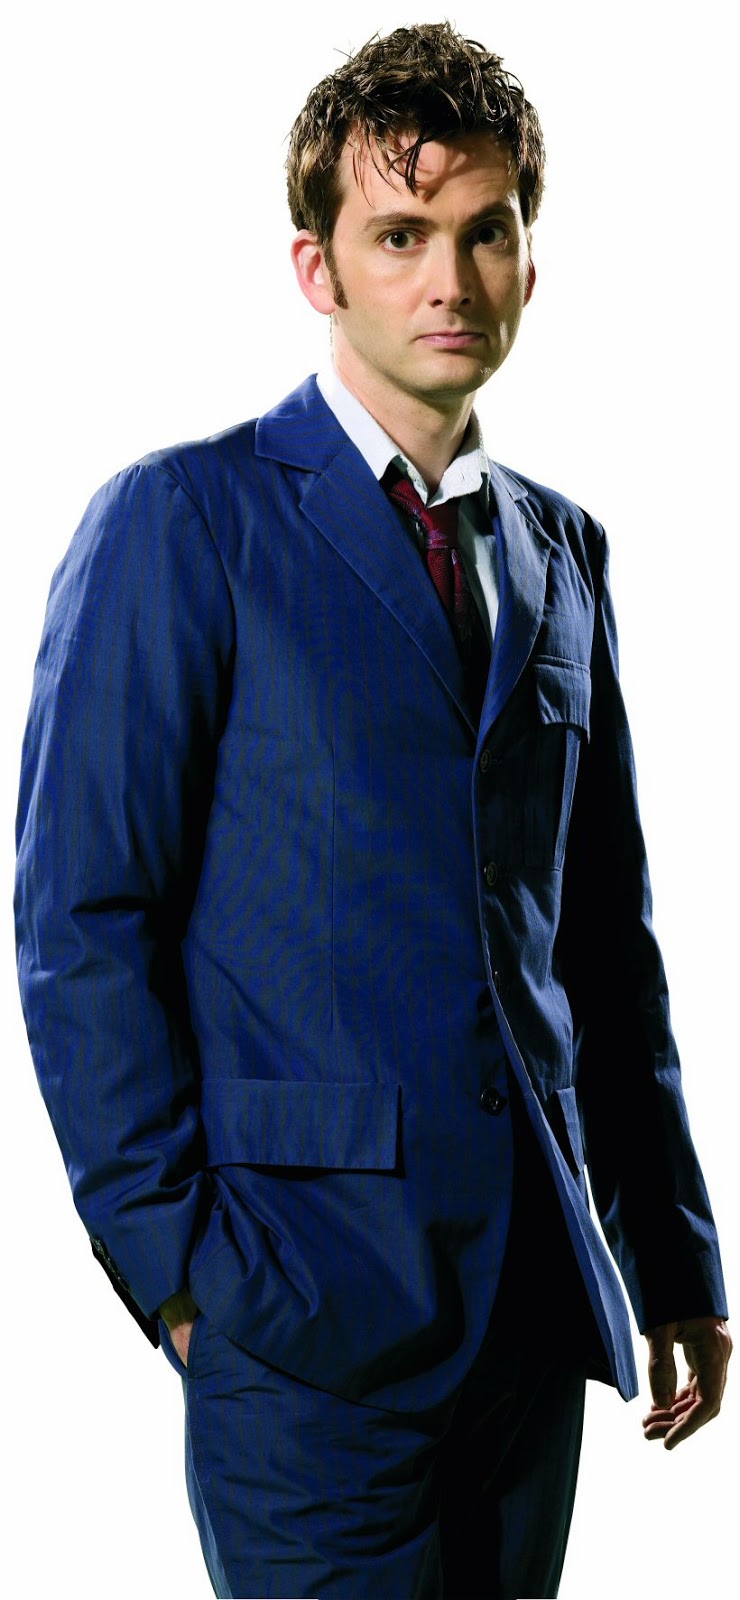 David Tennant Doctor Who Suit